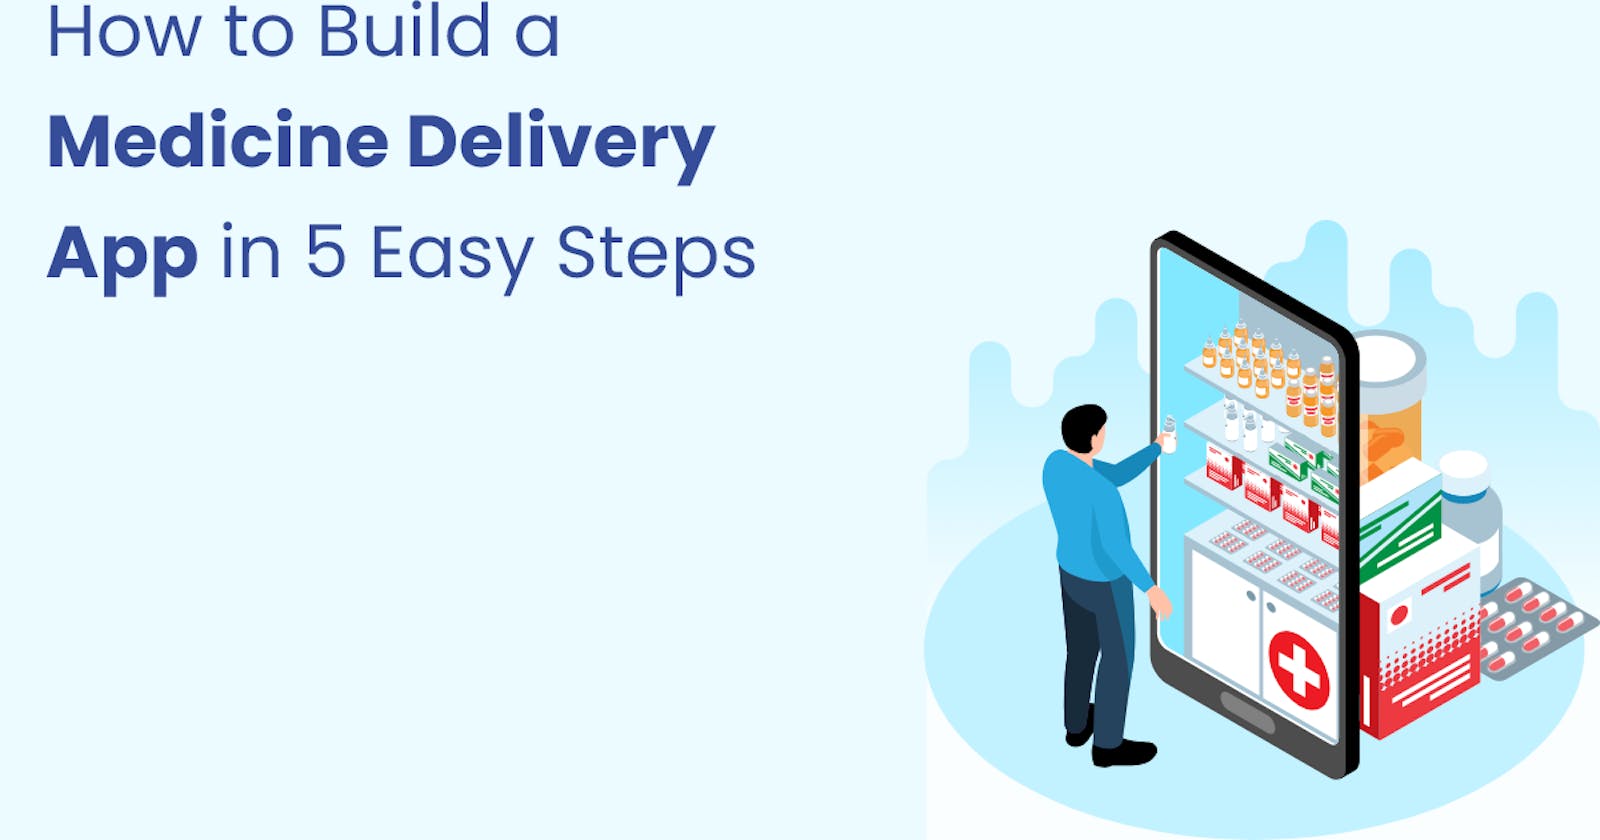 How to Build a Medicine Delivery App in 5 Easy Steps